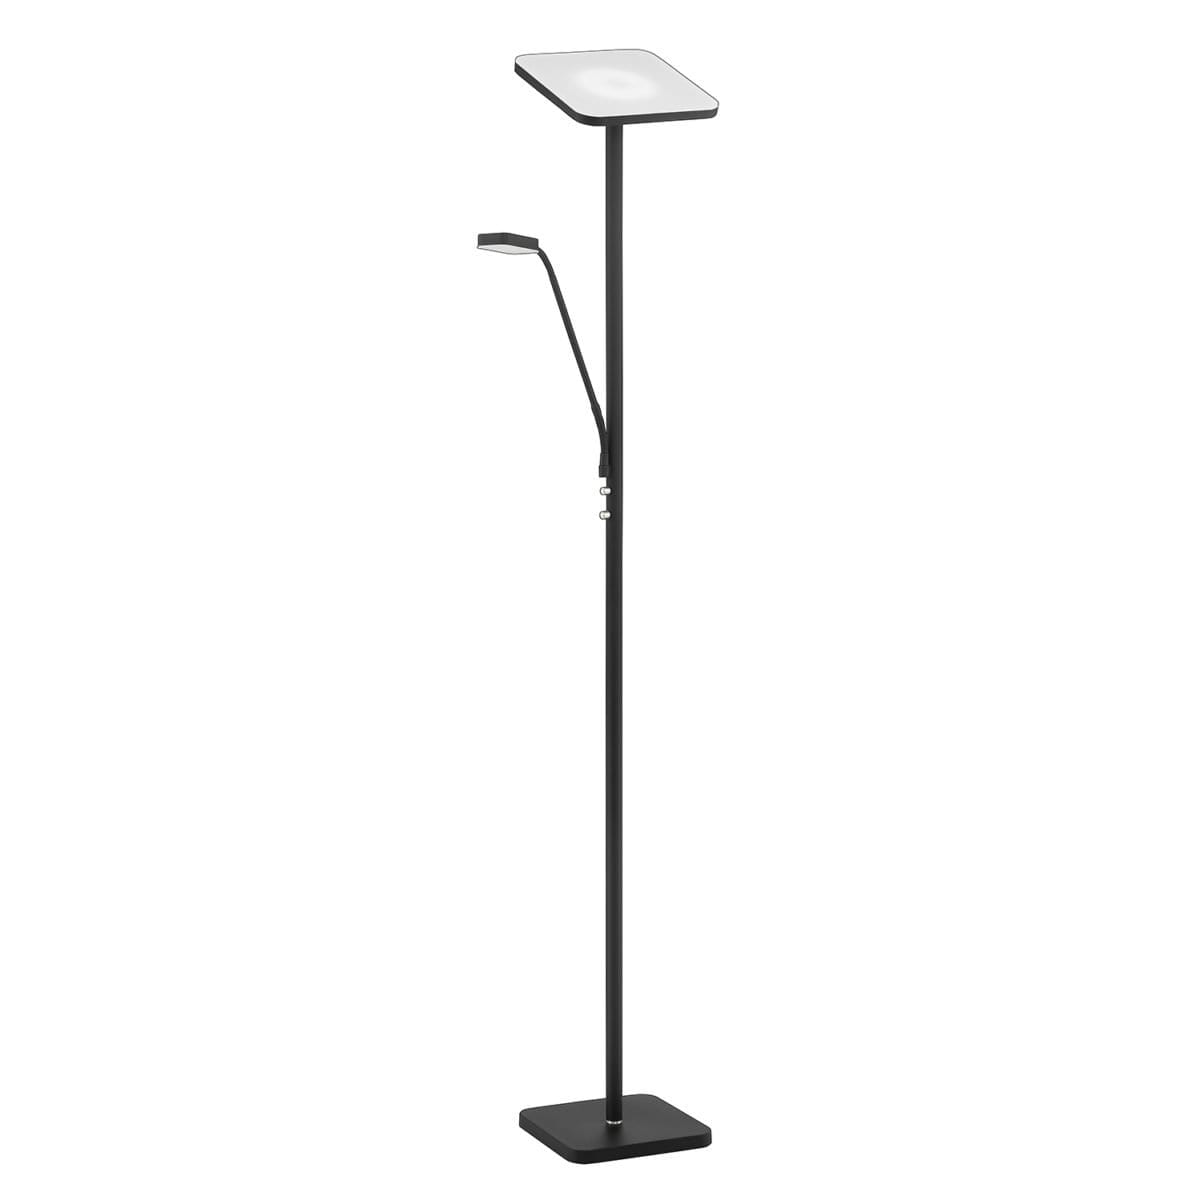 148 TC 5012 BLK/SN
LED Torchiere with Reading Light
Available in Black with Satin Nickle 
or Satin Nickle
Regular Price $333.99
Sale Price $233.99 
